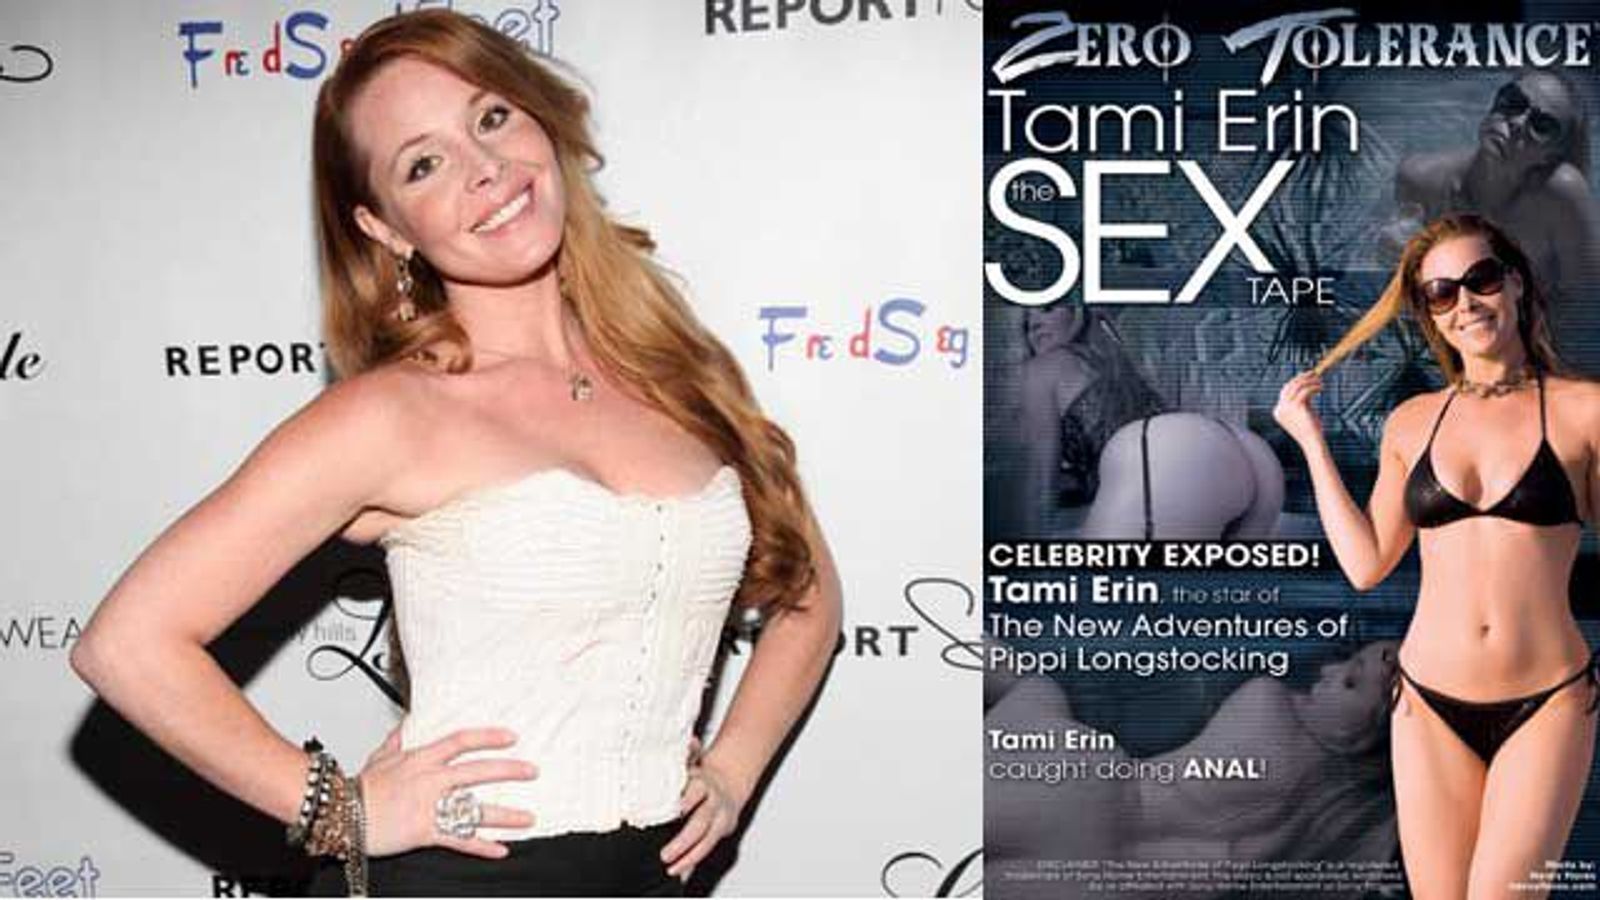 Sex Tape Celeb Tami Erin Popped for Felony Hit-and-Run, DUI